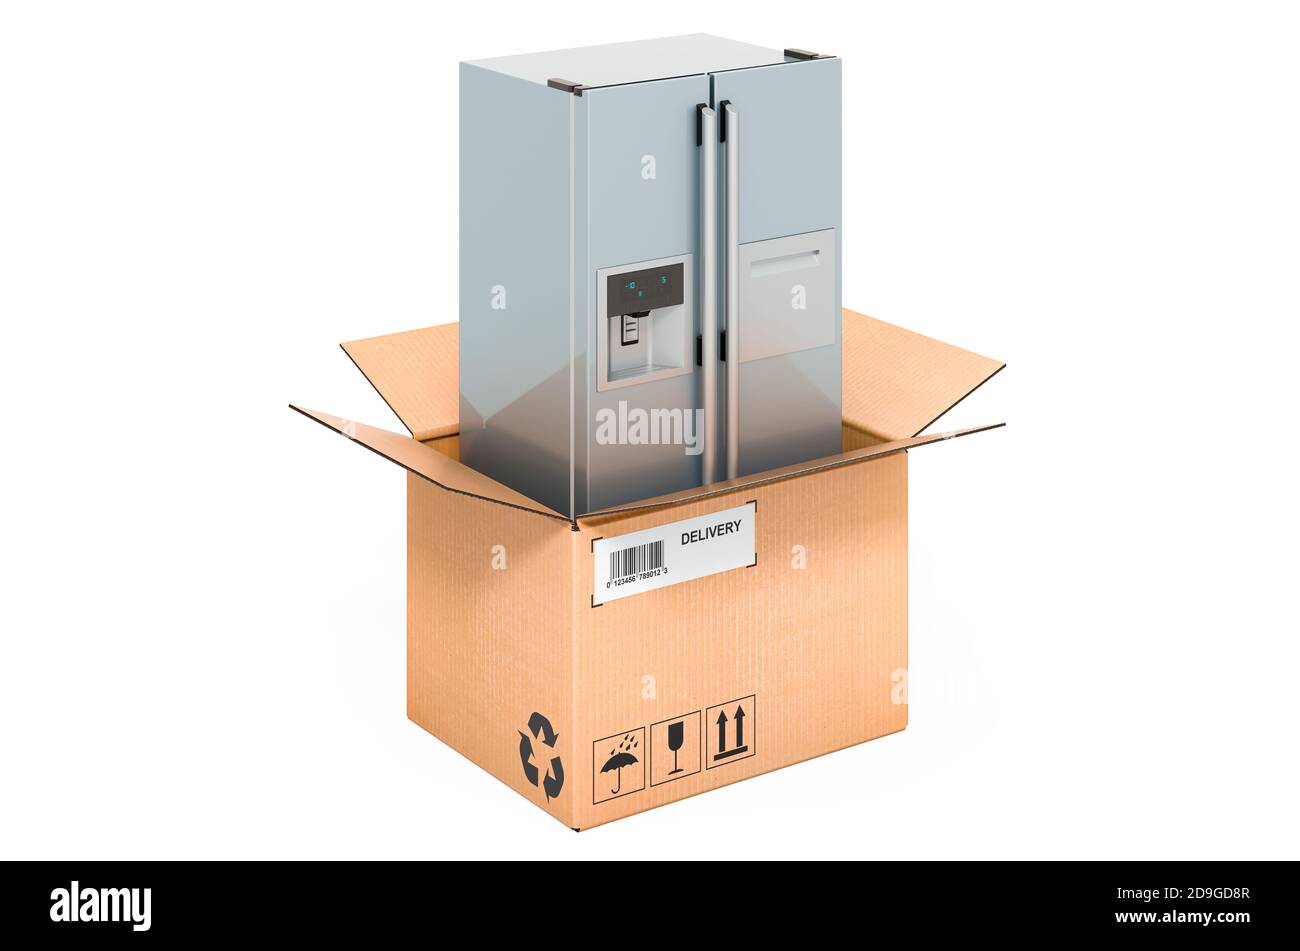 Double door refrigerator inside cardboard box, delivery concept. 3D rendering isolated on white background Stock Photo